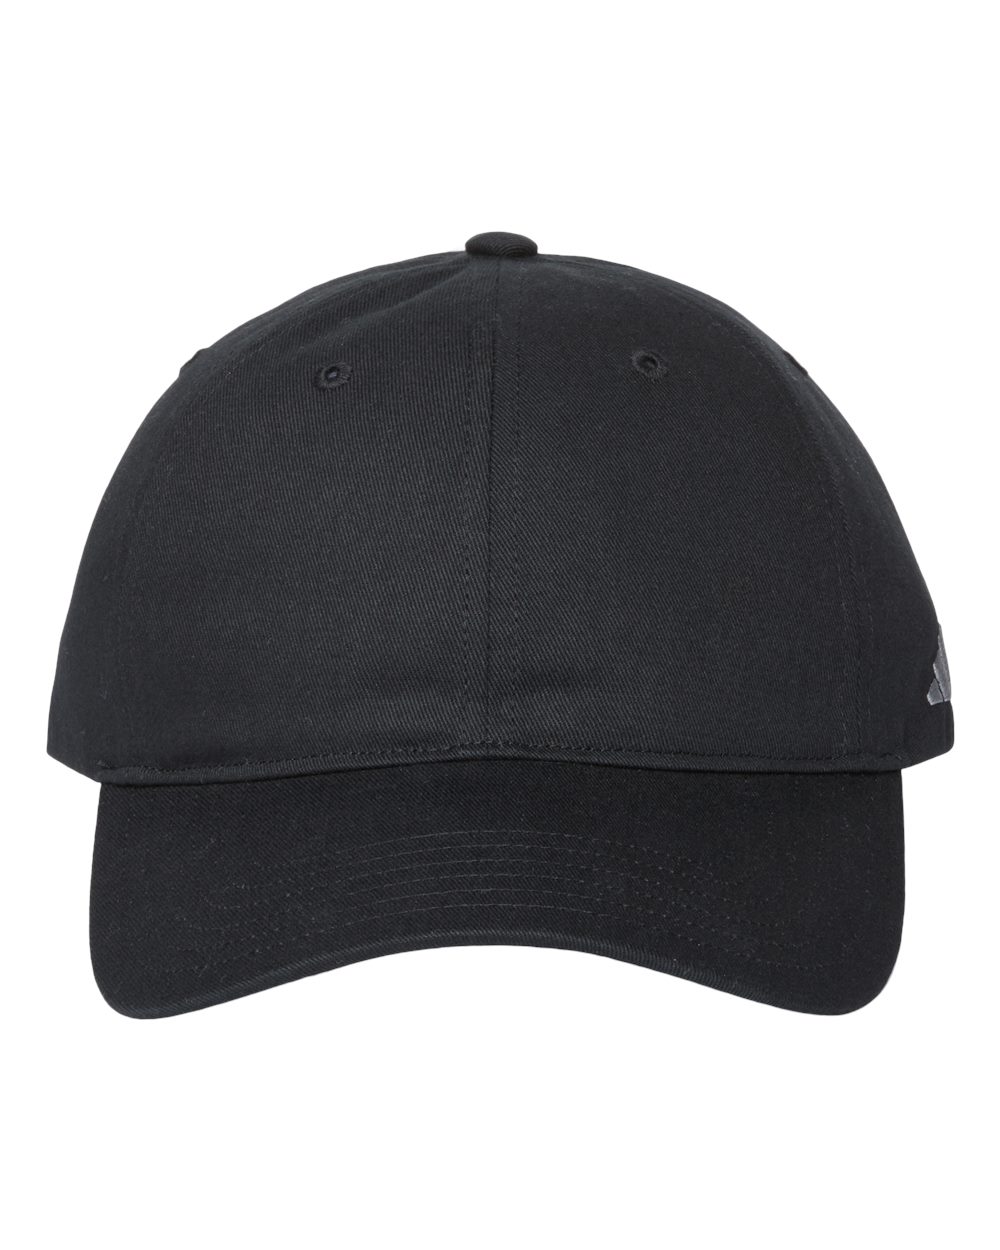 Relaxed Organic Golf A12S Adidas Cap. Sustainable